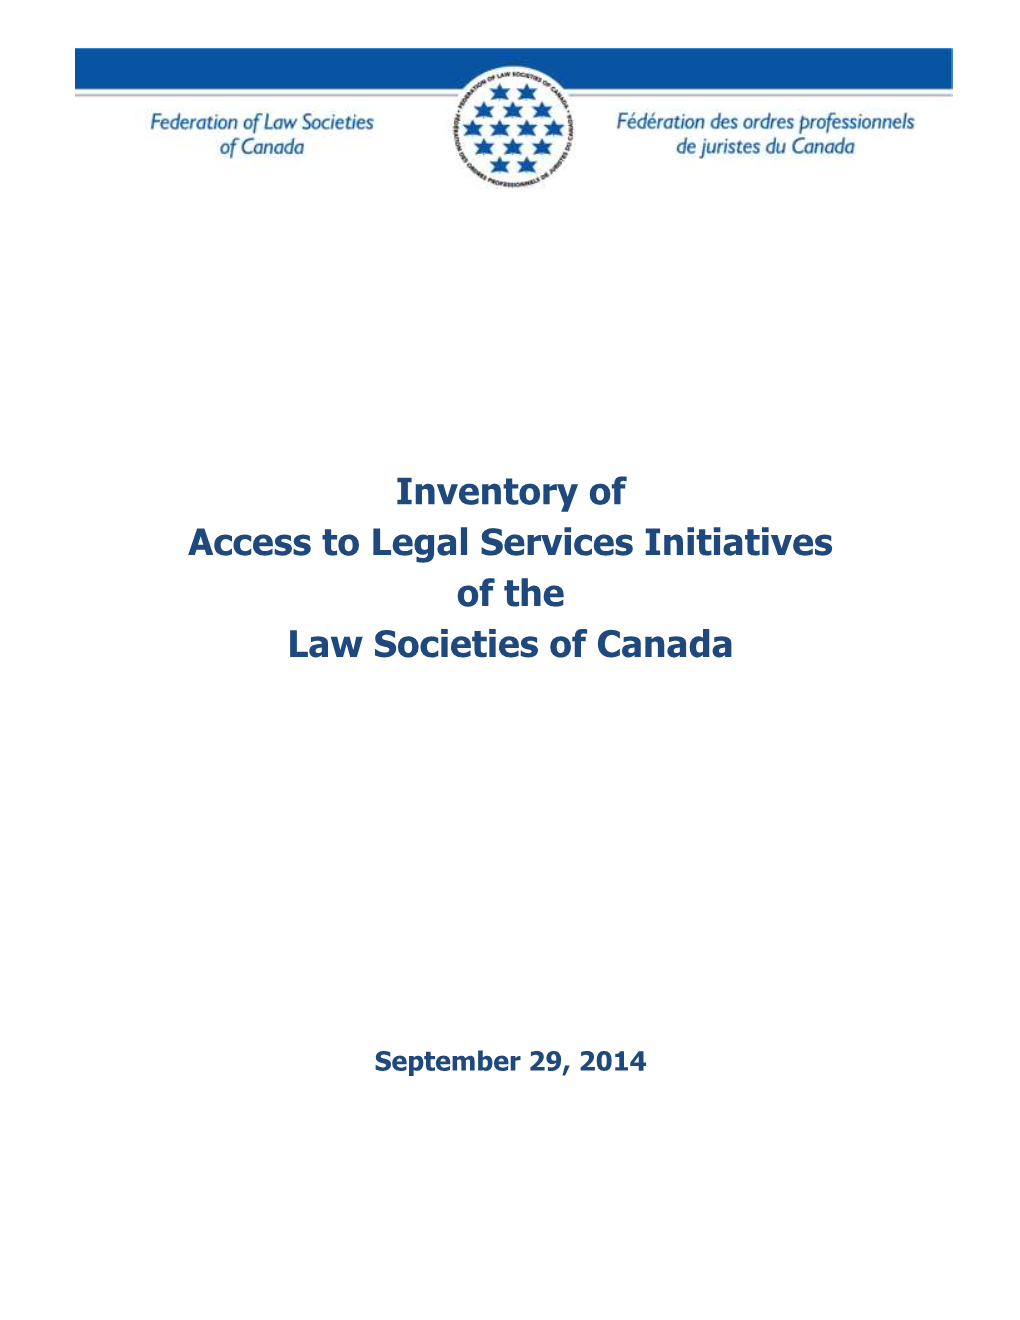 Inventory of Access to Legal Services Initiatives of the Law Societies of Canada